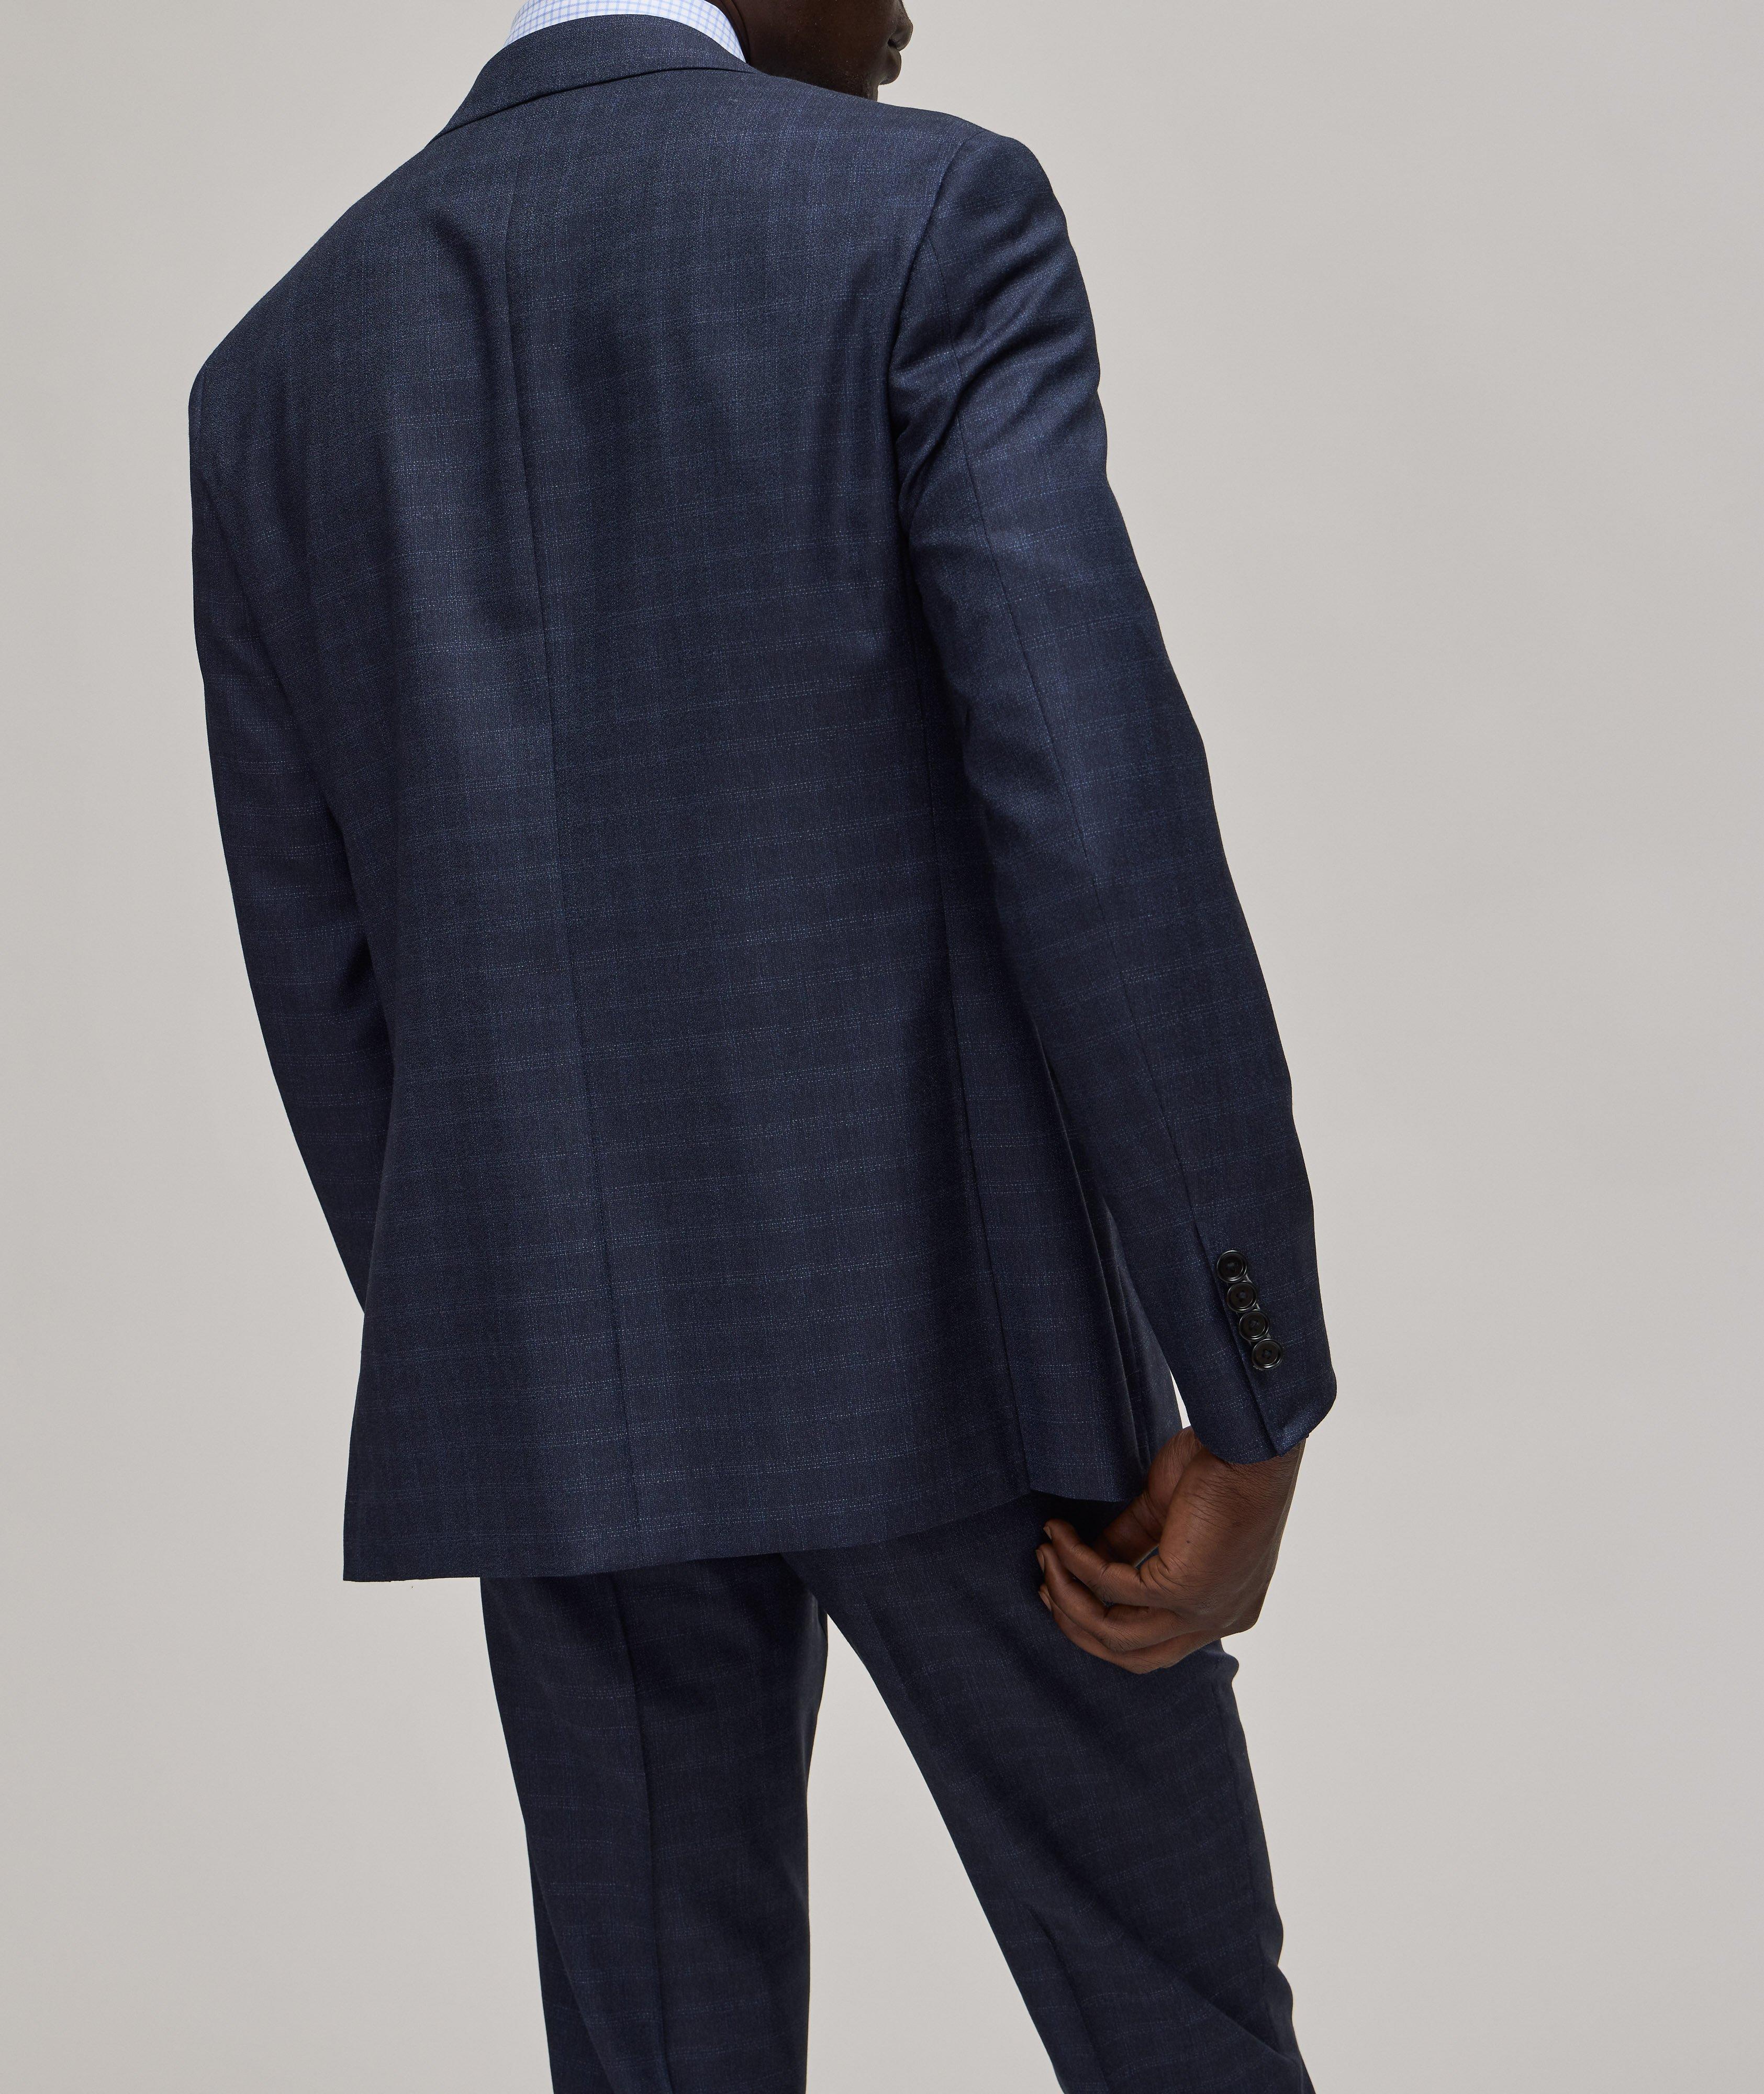 Kei Graphic Check Pattern Wool Suit image 2